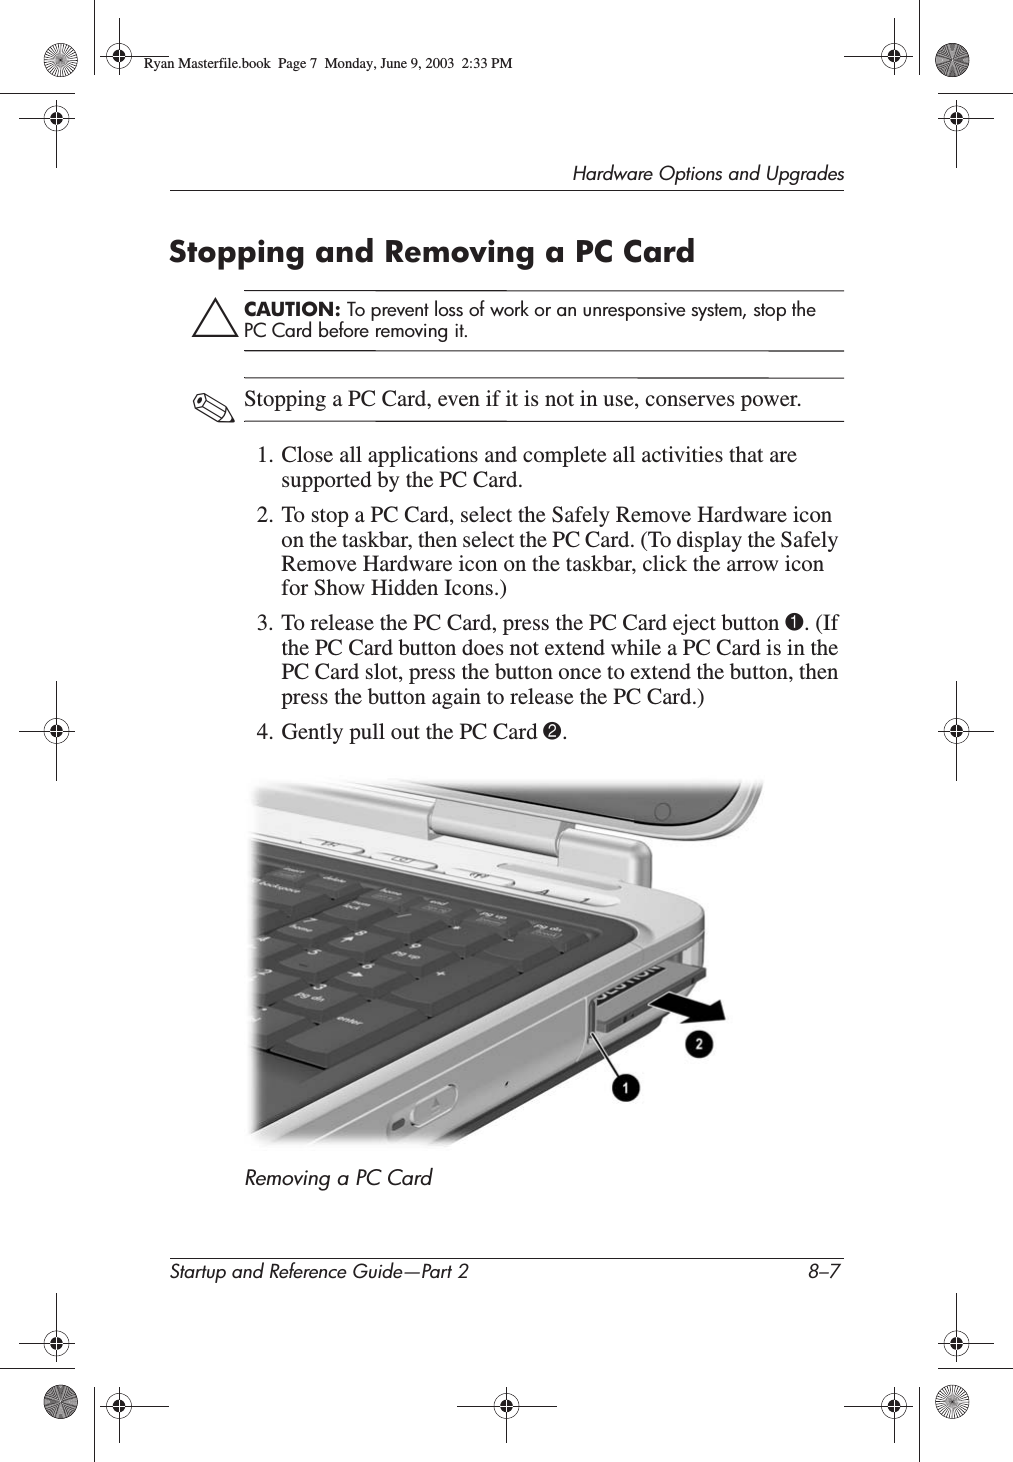 Hardware Options and UpgradesStartup and Reference Guide—Part 2 8–7Stopping and Removing a PC CardÄCAUTION: To prevent loss of work or an unresponsive system, stop the PC Card before removing it.✎Stopping a PC Card, even if it is not in use, conserves power.1. Close all applications and complete all activities that are supported by the PC Card.2. To stop a PC Card, select the Safely Remove Hardware icon on the taskbar, then select the PC Card. (To display the Safely Remove Hardware icon on the taskbar, click the arrow icon for Show Hidden Icons.)3. To release the PC Card, press the PC Card eject button 1. (If the PC Card button does not extend while a PC Card is in the PC Card slot, press the button once to extend the button, then press the button again to release the PC Card.)4. Gently pull out the PC Card 2.Removing a PC Card Ryan Masterfile.book  Page 7  Monday, June 9, 2003  2:33 PM